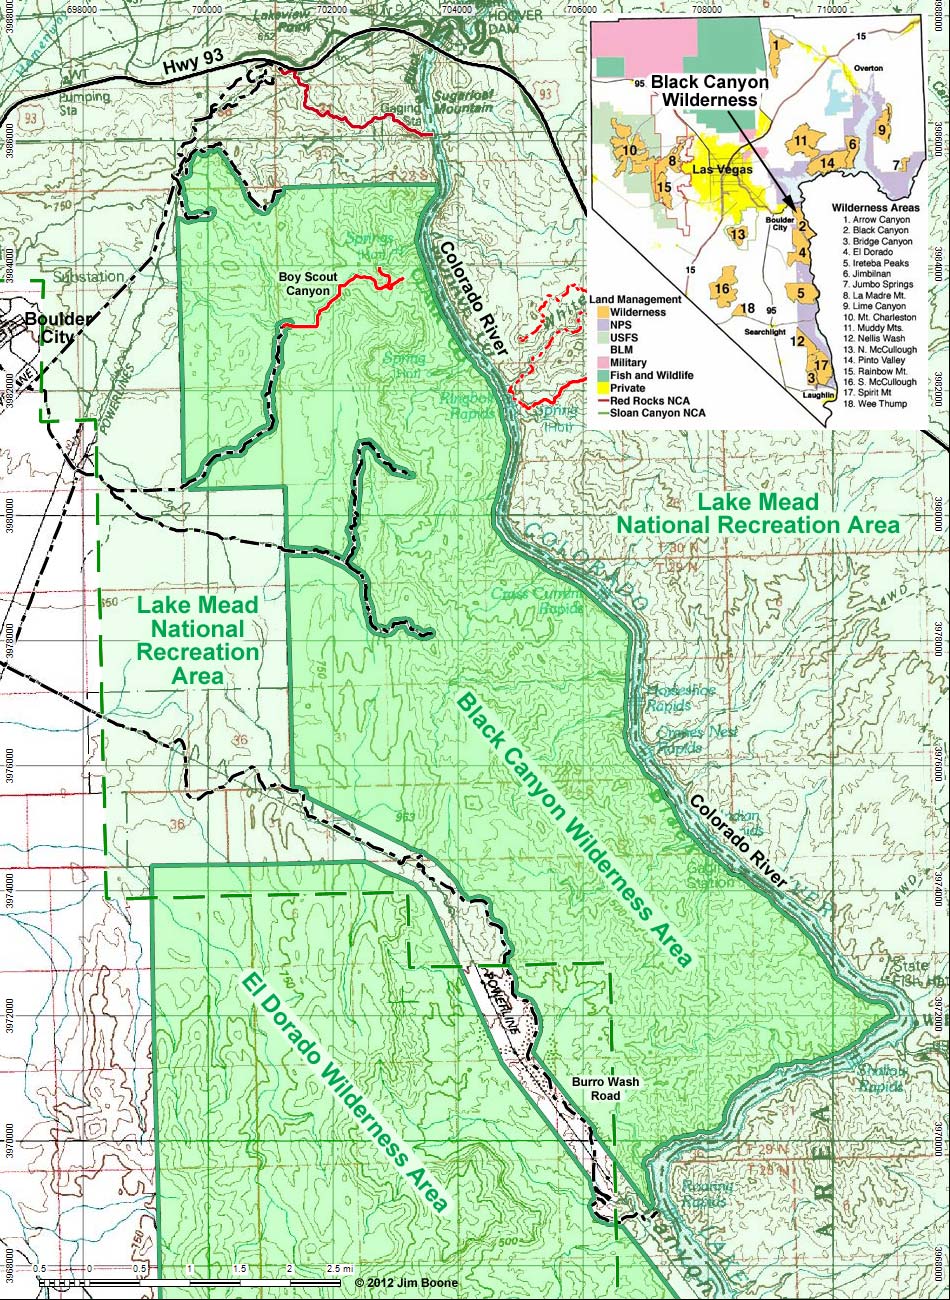 Black Canyon Wilderness Area Map